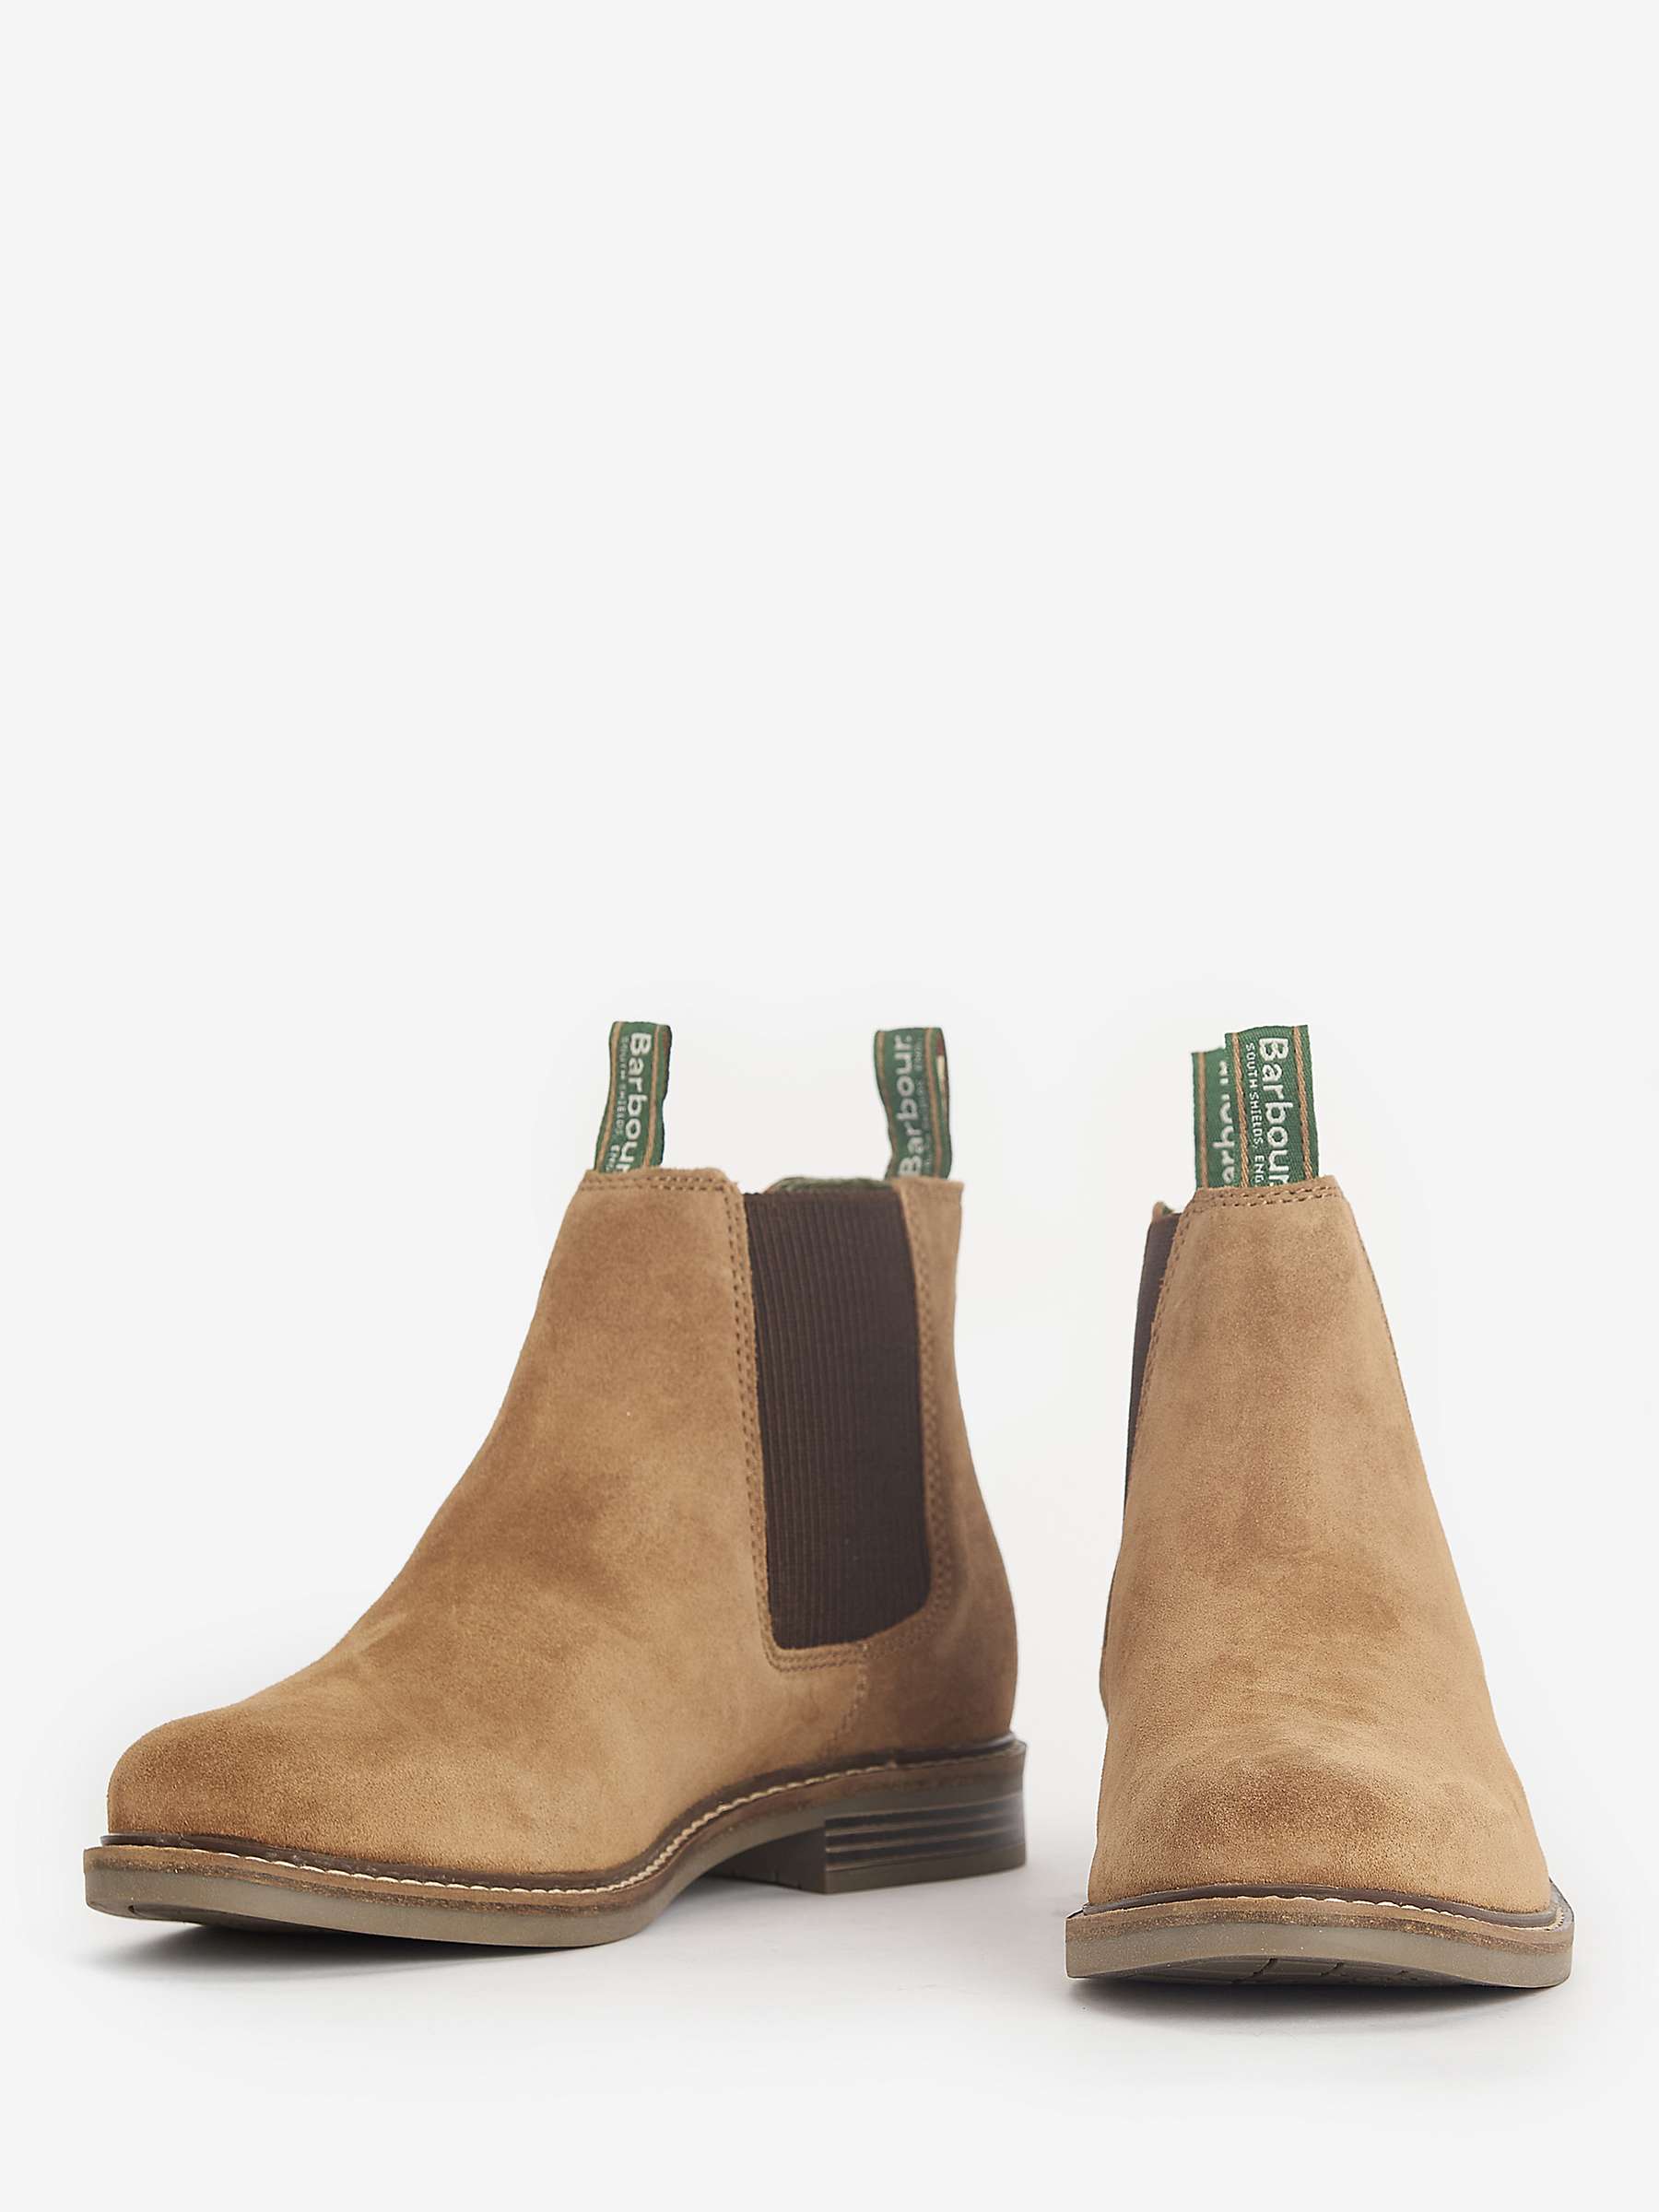 Buy Barbour Farsley Fawn Suede Boots, Brown Online at johnlewis.com